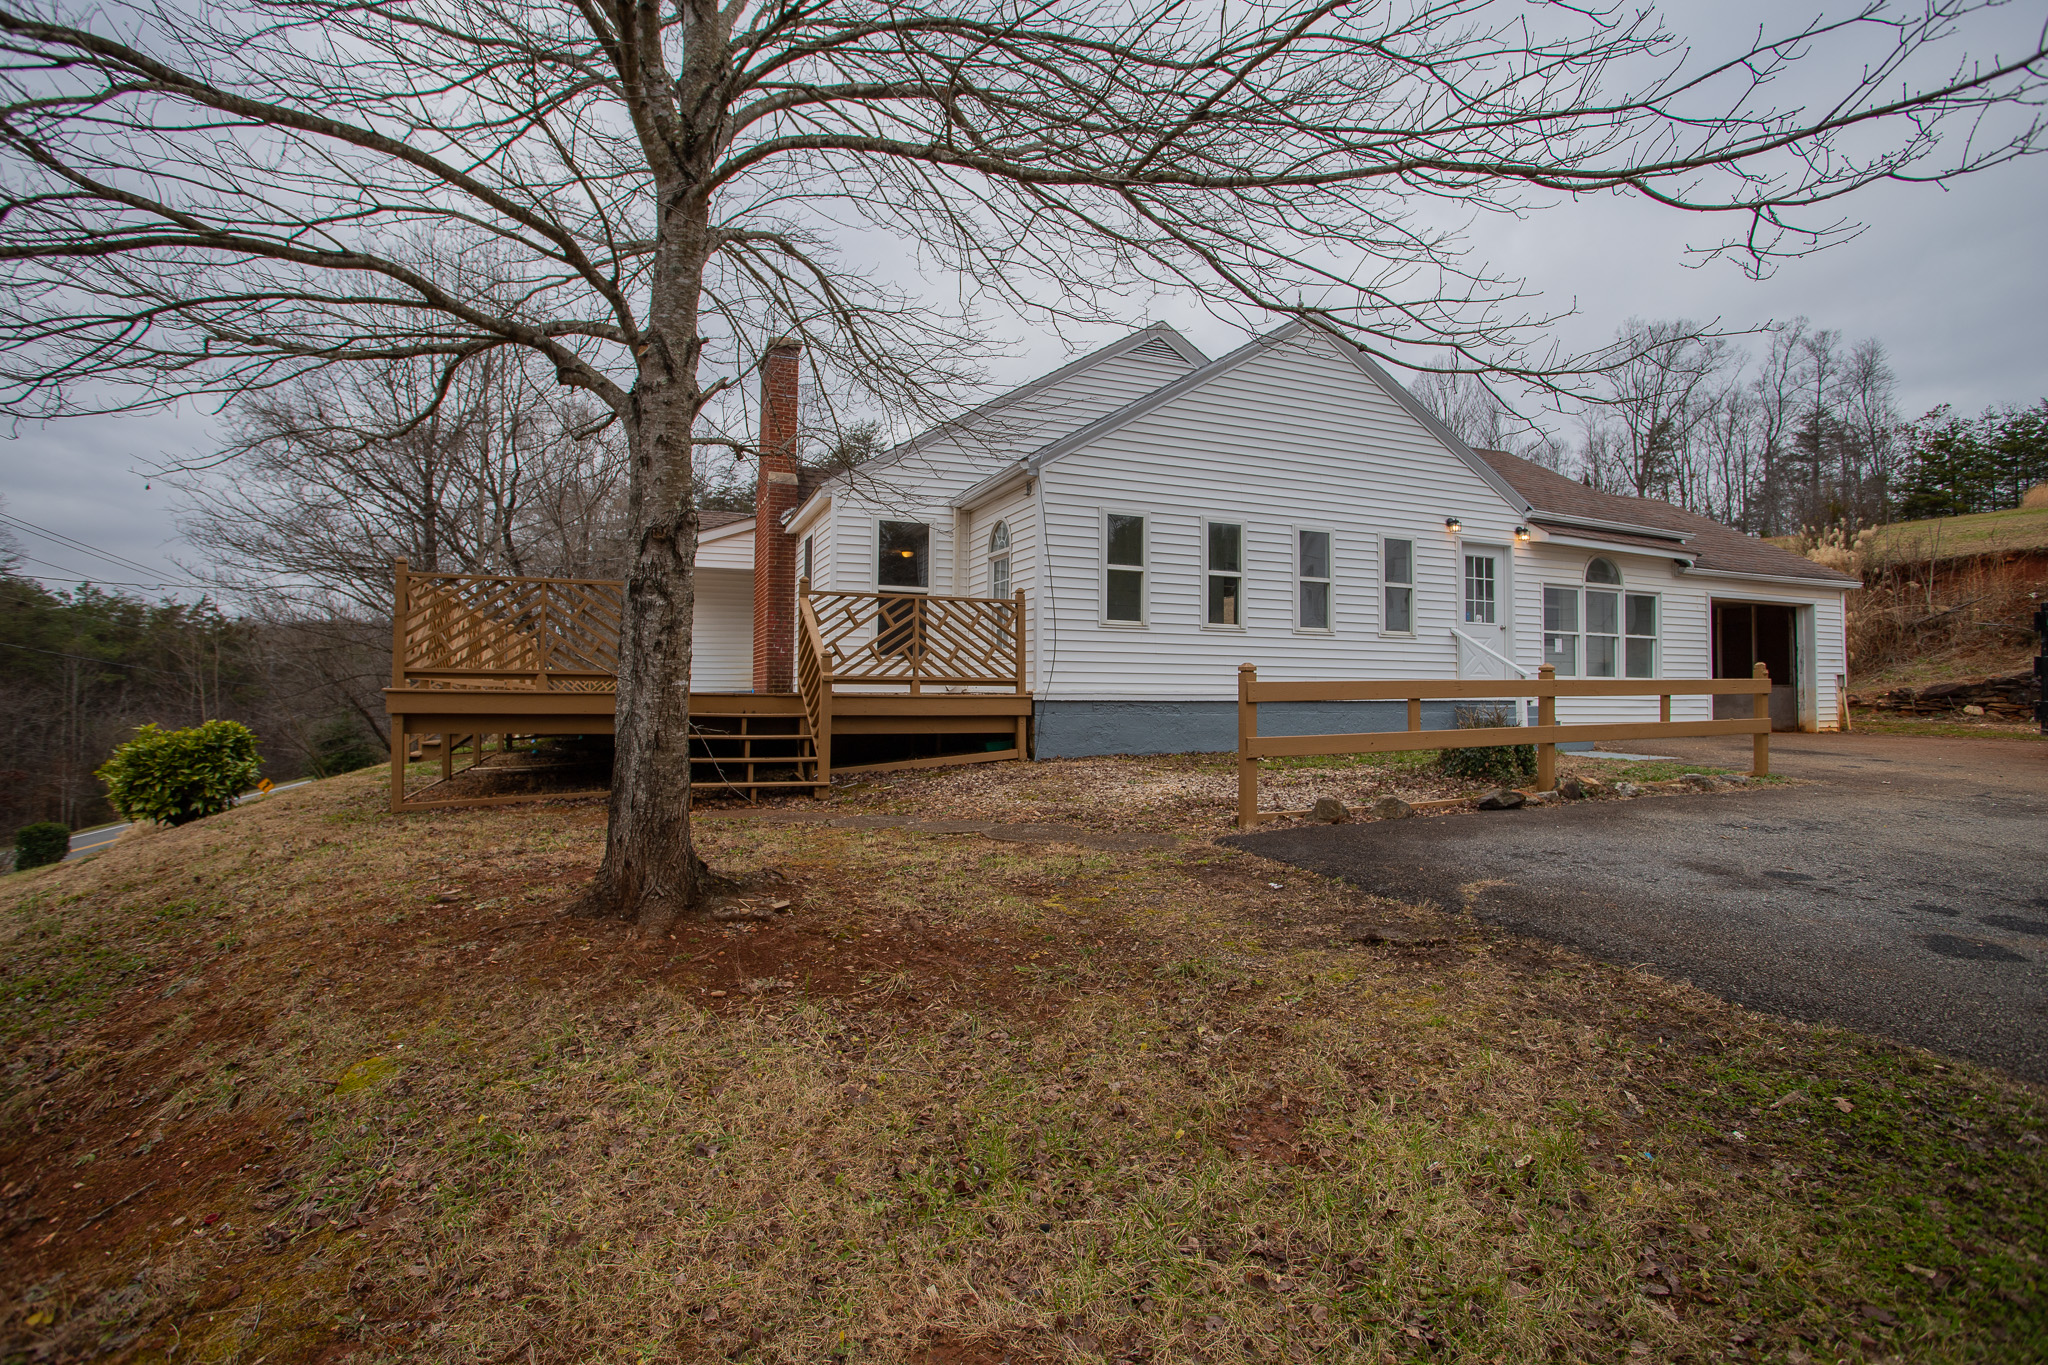 Home in Ferrum with 3 Acres! 8700 Franklin St